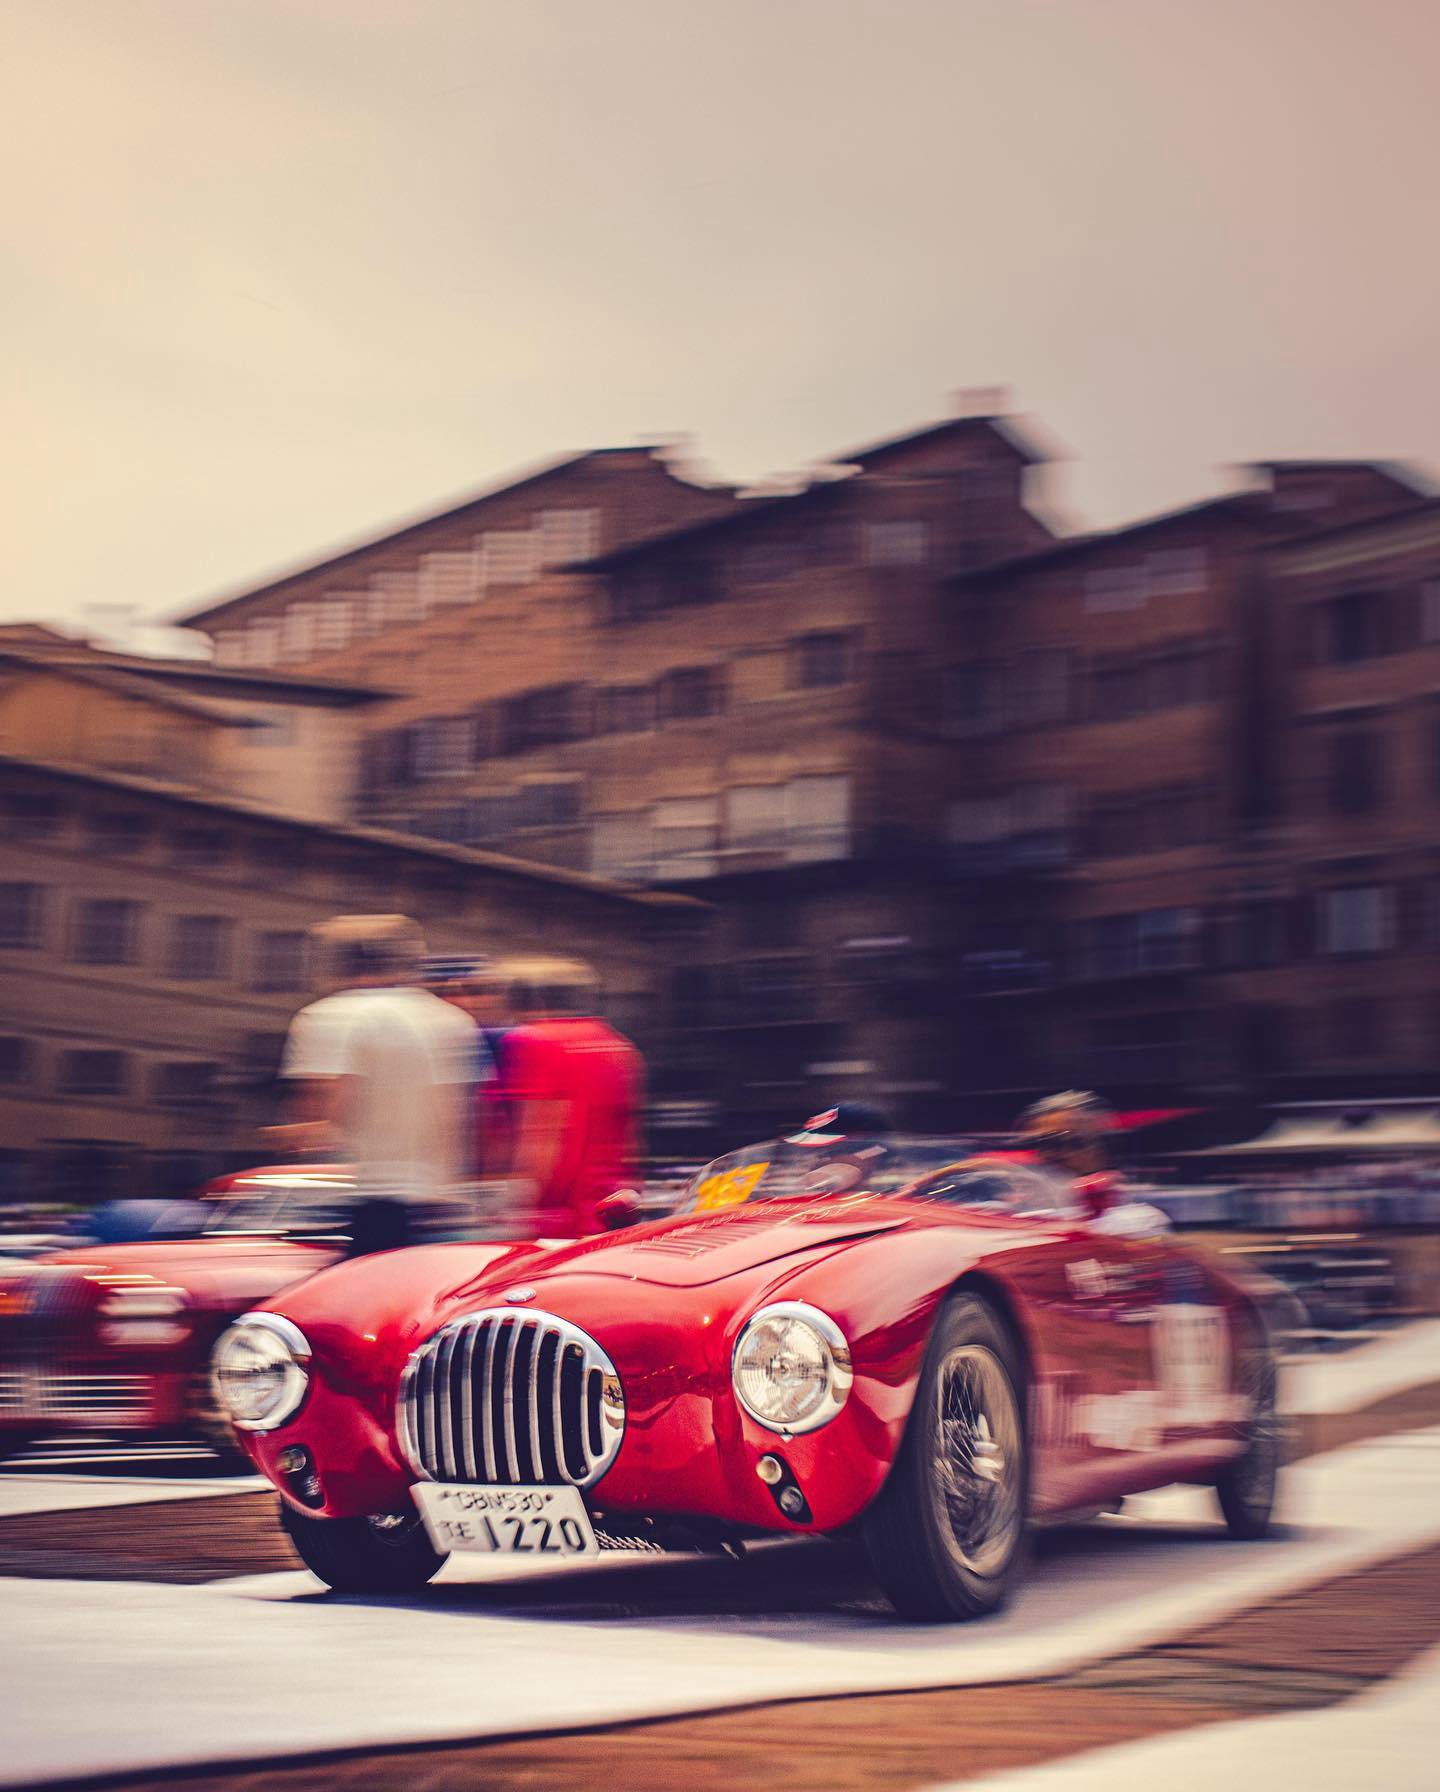 Petrolicious - A quintessential part of Italy’s (and thus the world’s) motorsport canon, the Mille M